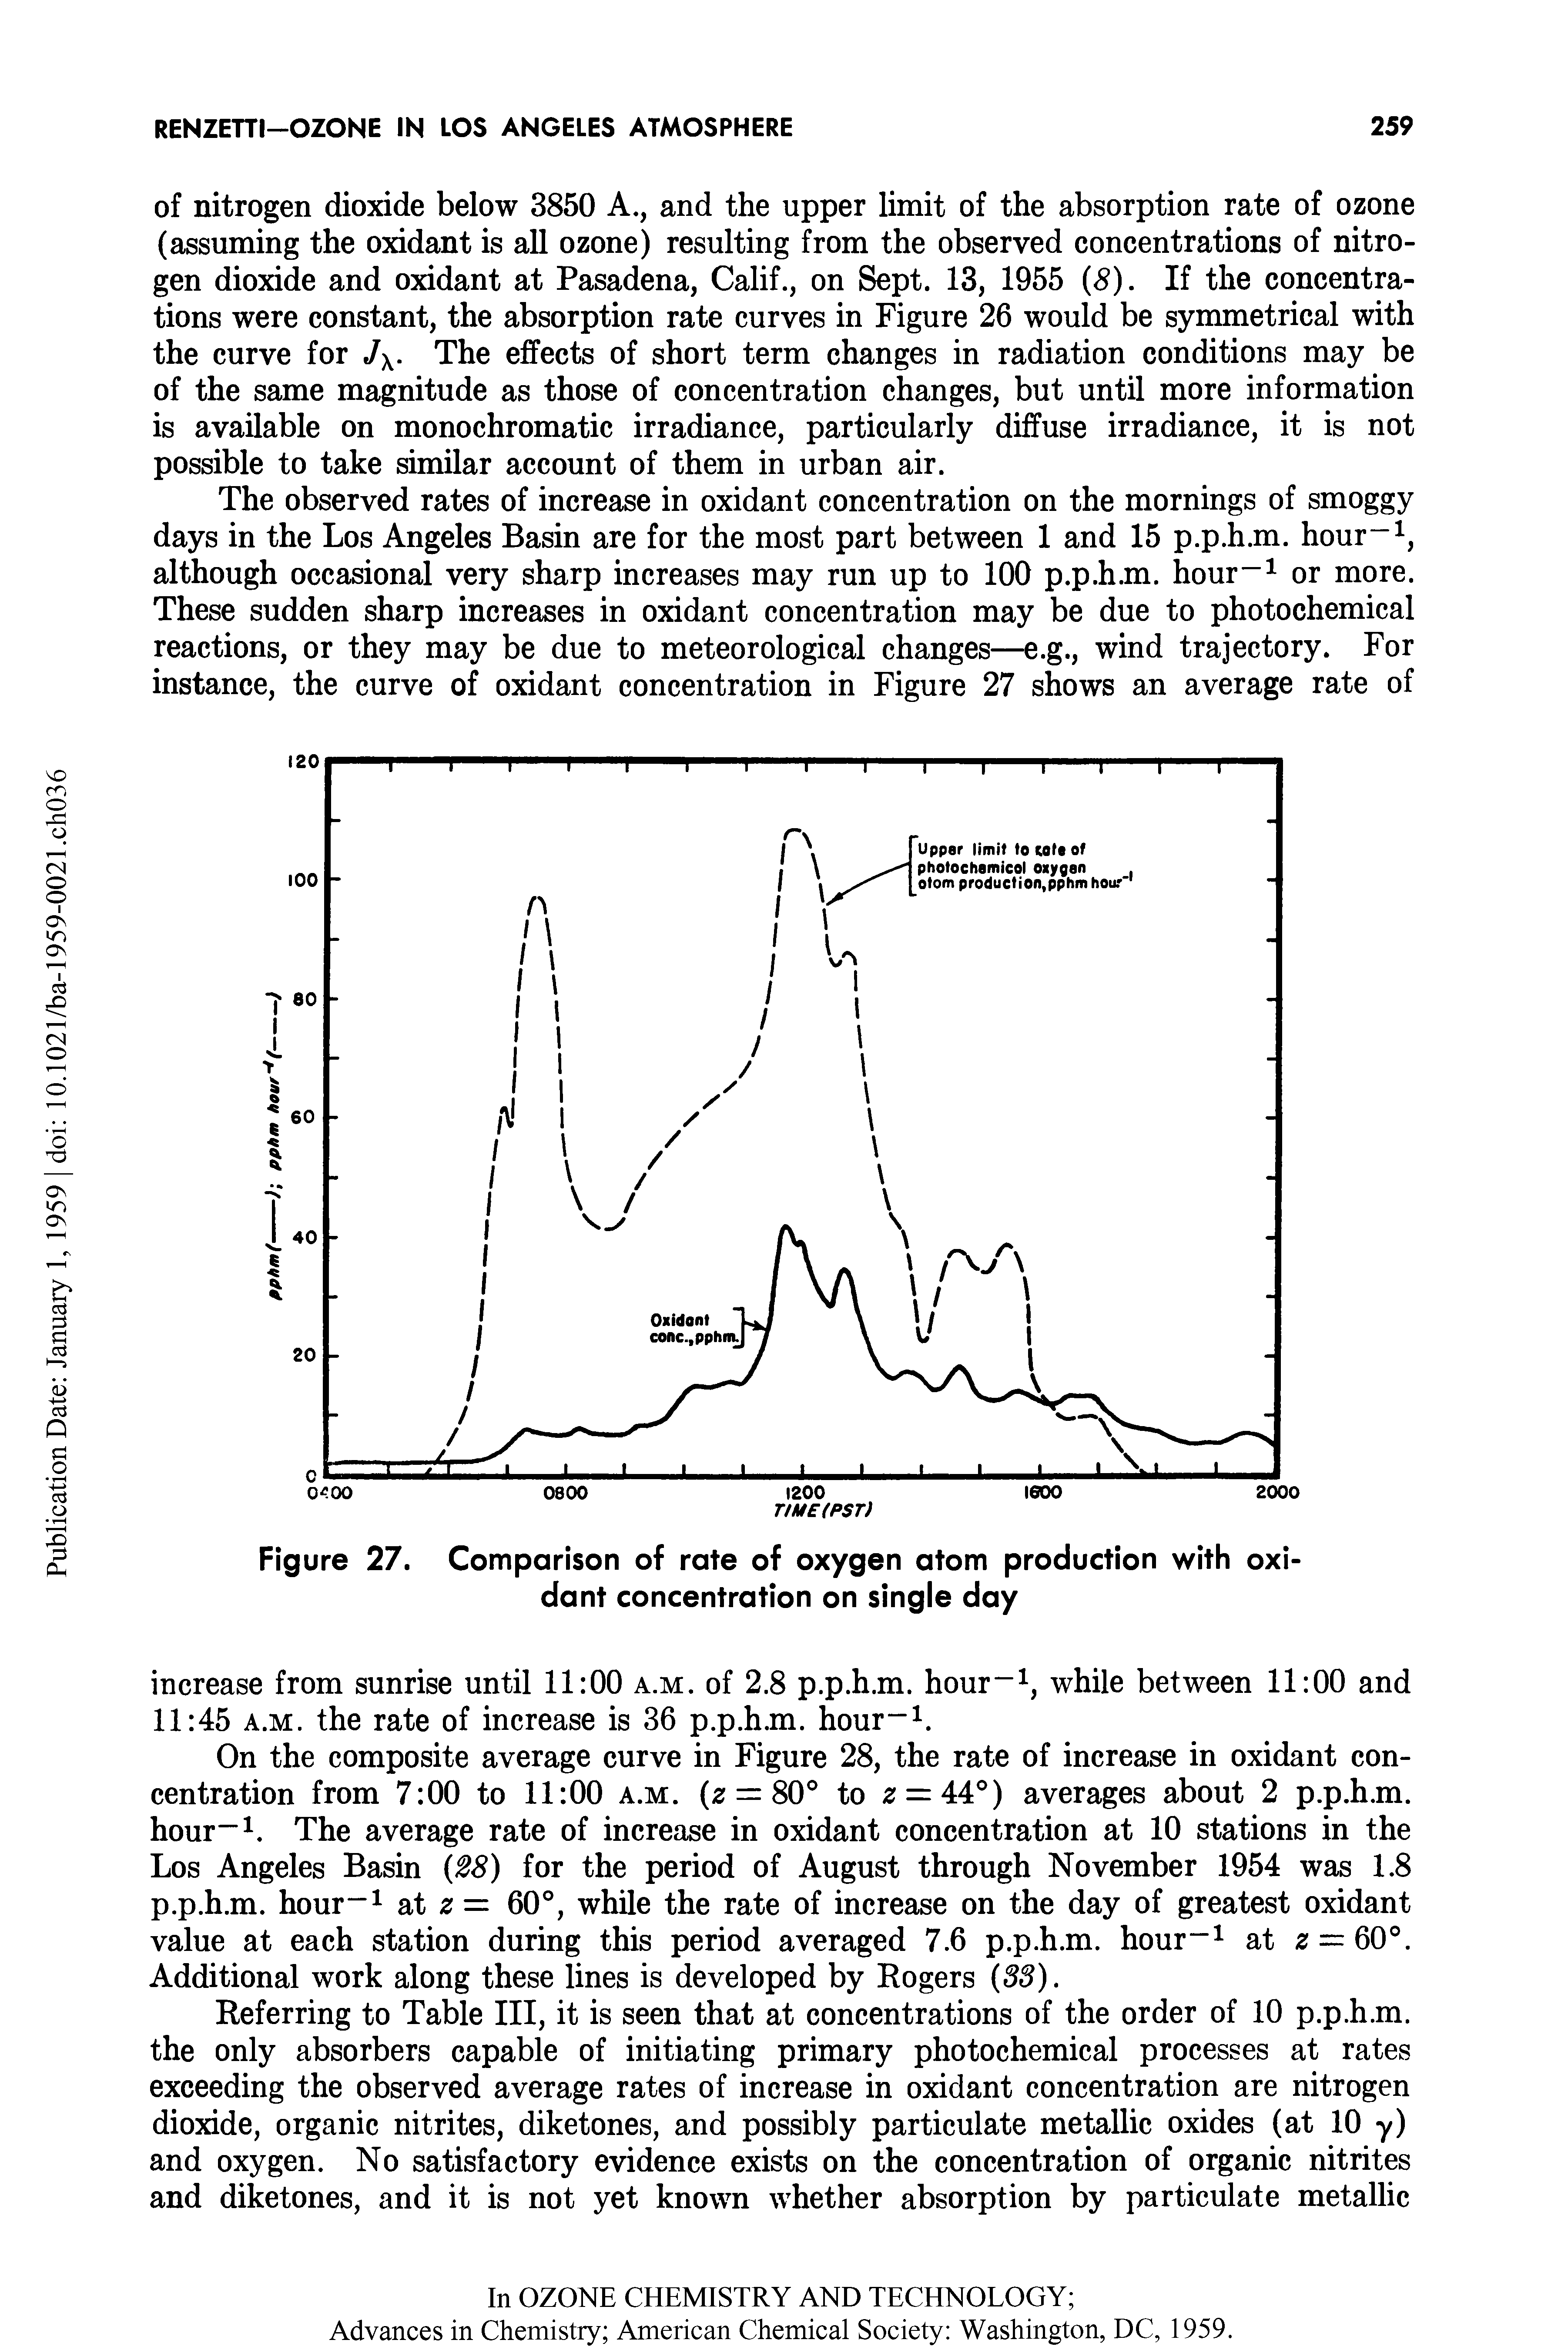 Figure 27. Comparison of rate of oxygen atom production with oxidant concentration on single day...